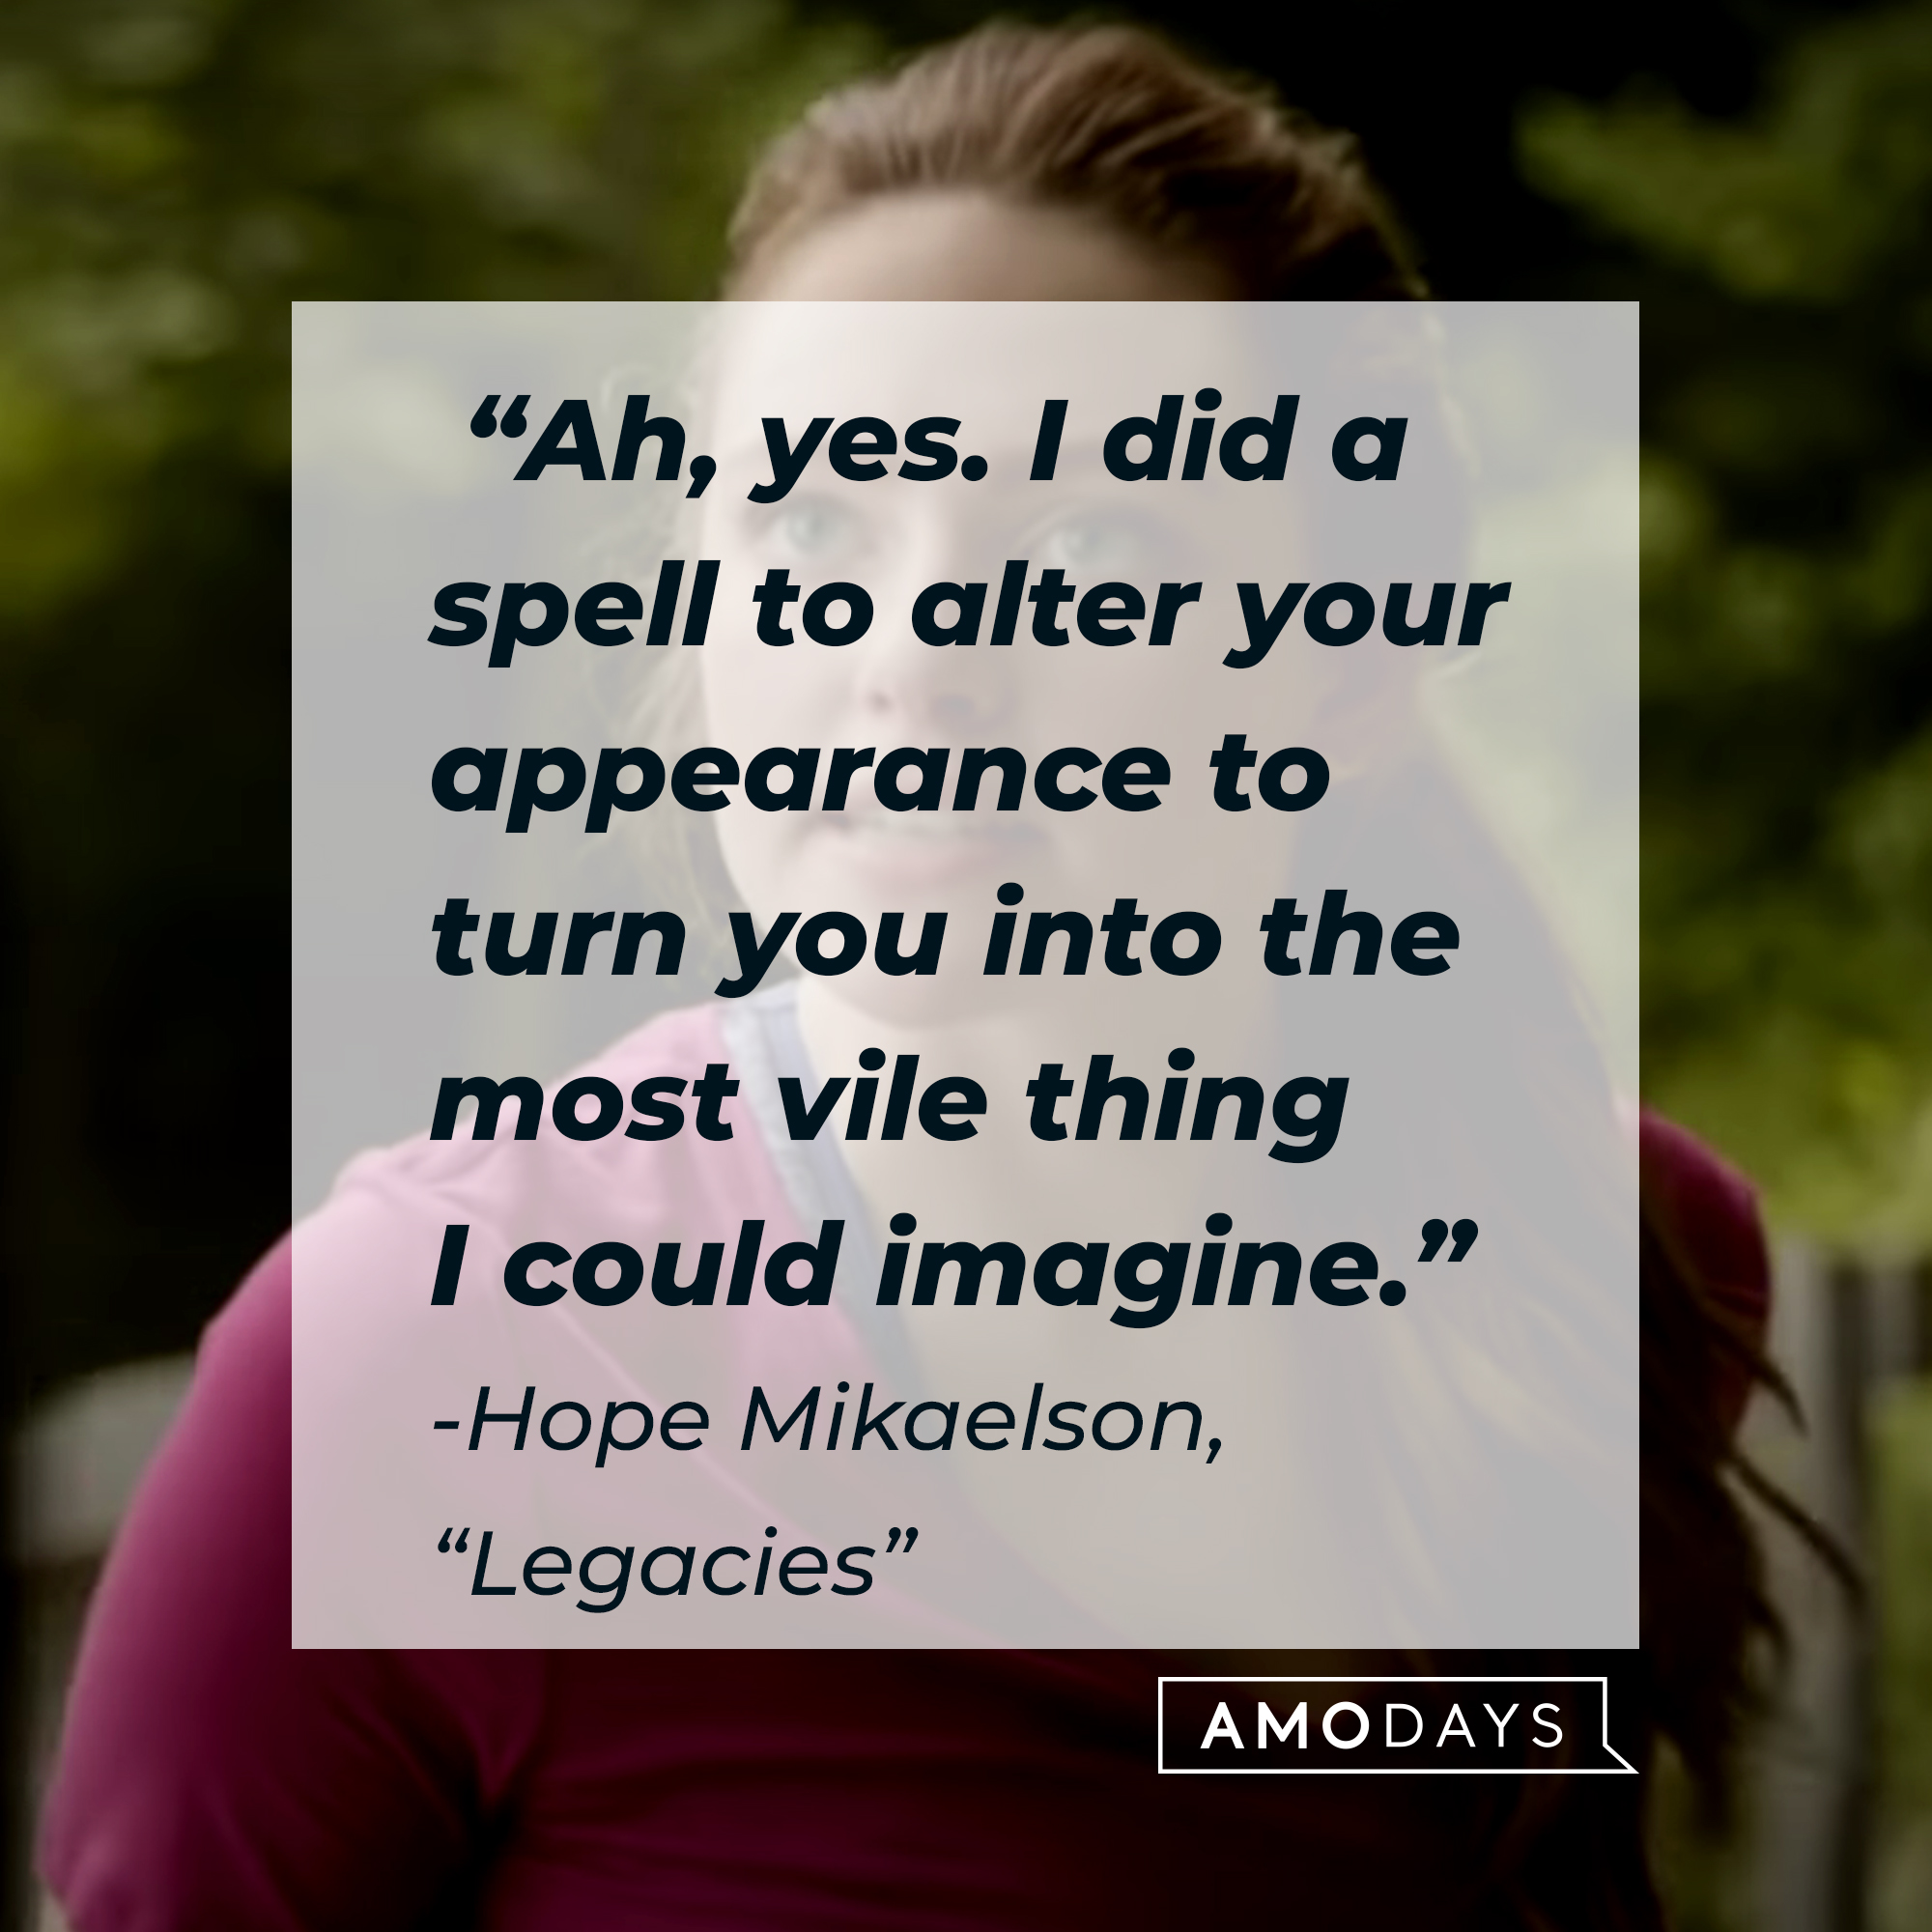 Hope Mikaelson with her quote: “Ah, yes. I did a spell to alter your appearance to turn you into the most vile thing I could imagine.” | Source: Facebook.com/CWLegacies